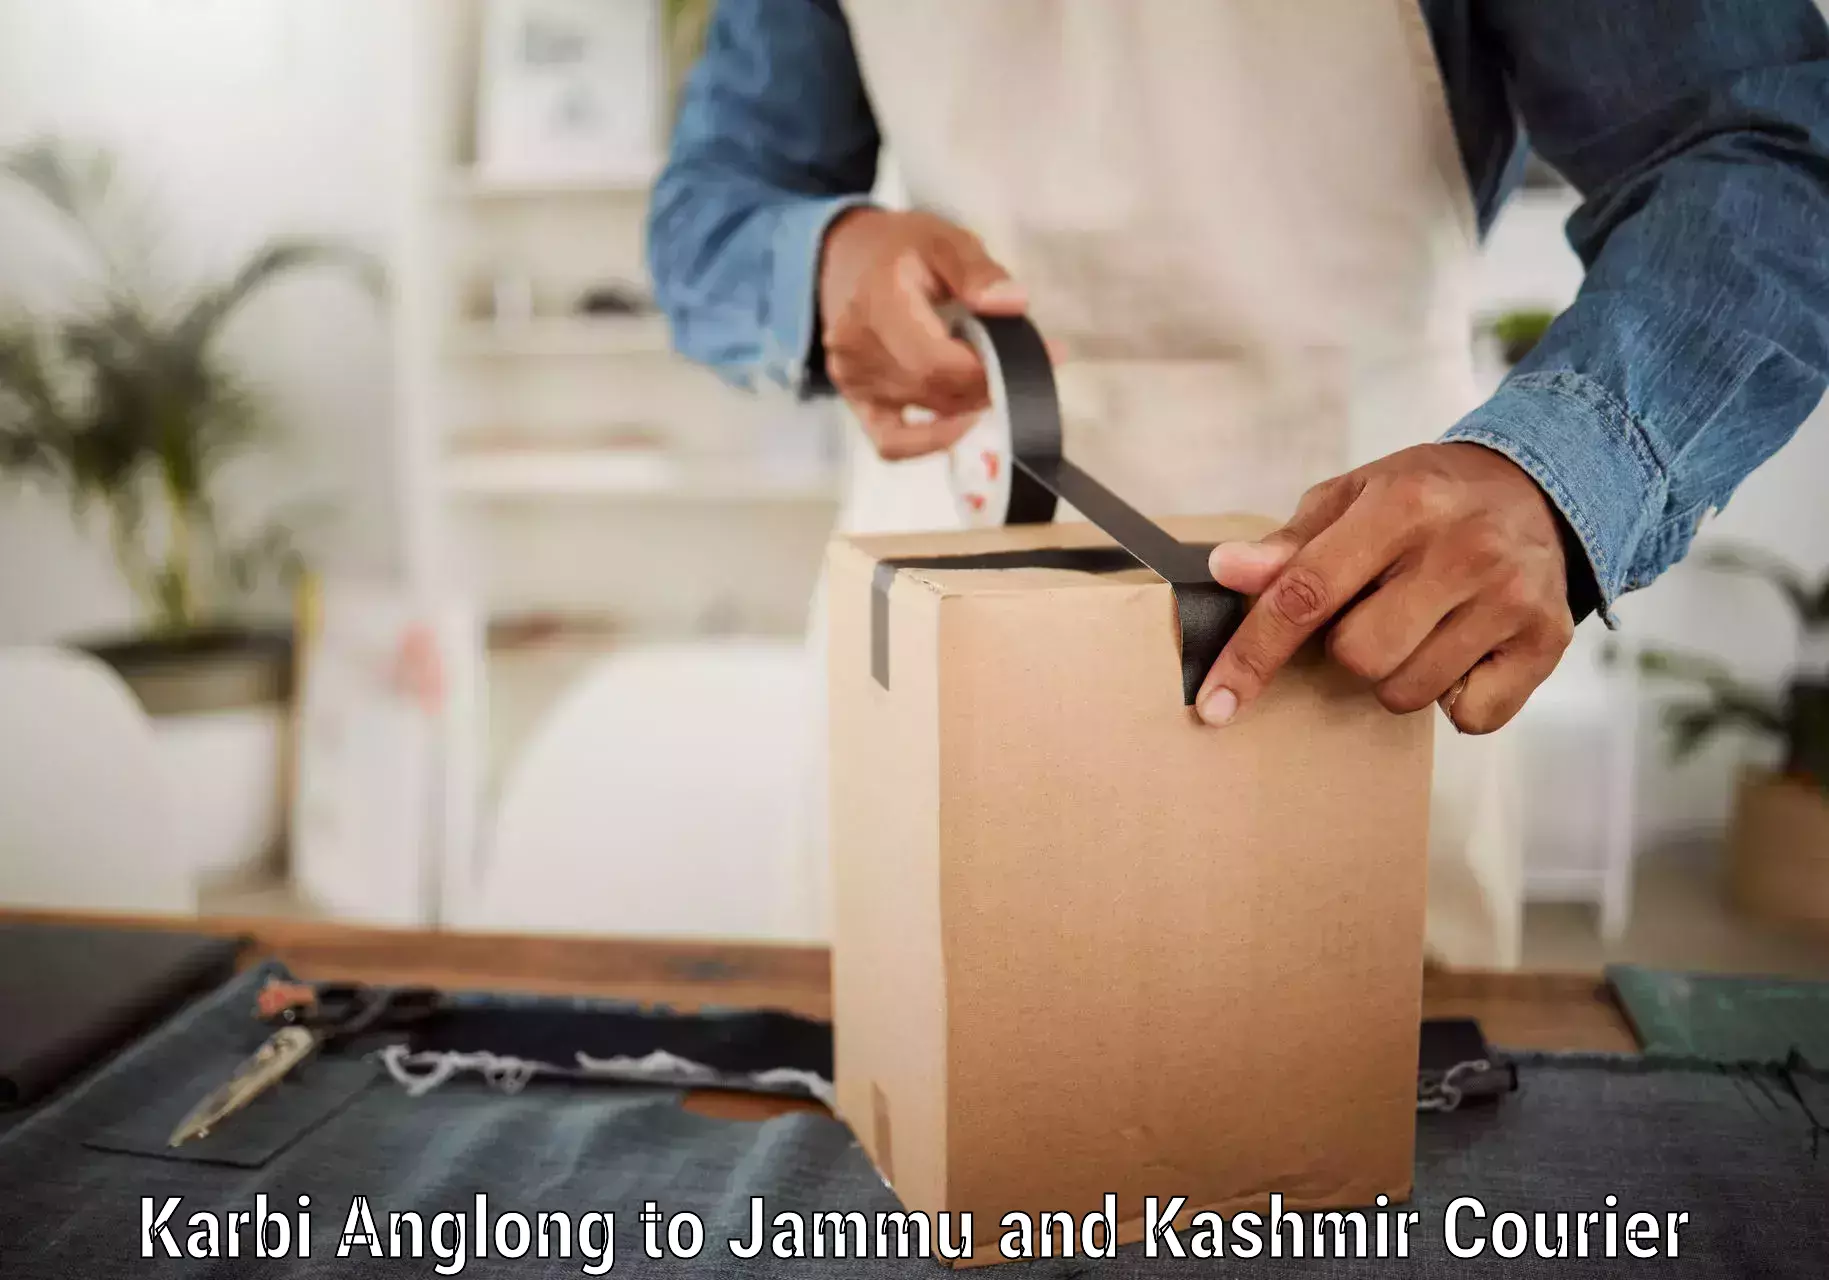 International courier networks Karbi Anglong to Baramulla